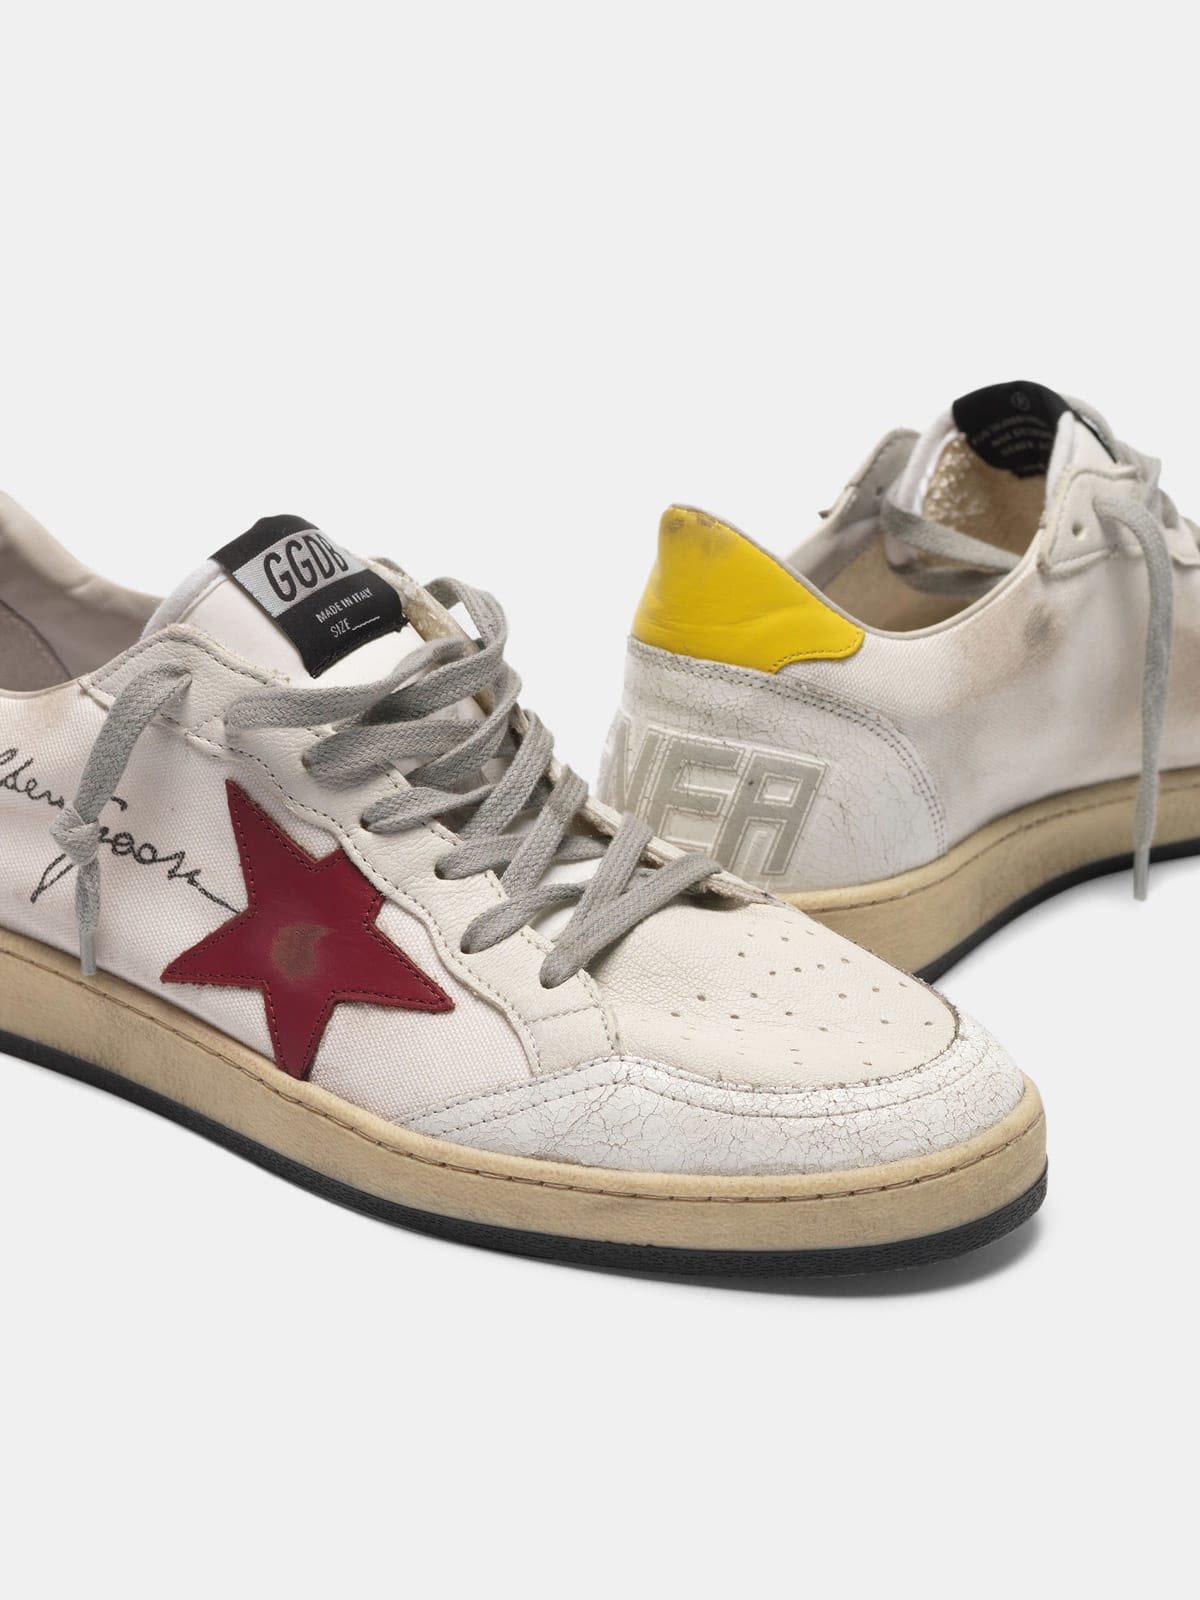 Ball Star sneakers in leather and canvas with the Golden Goose signature